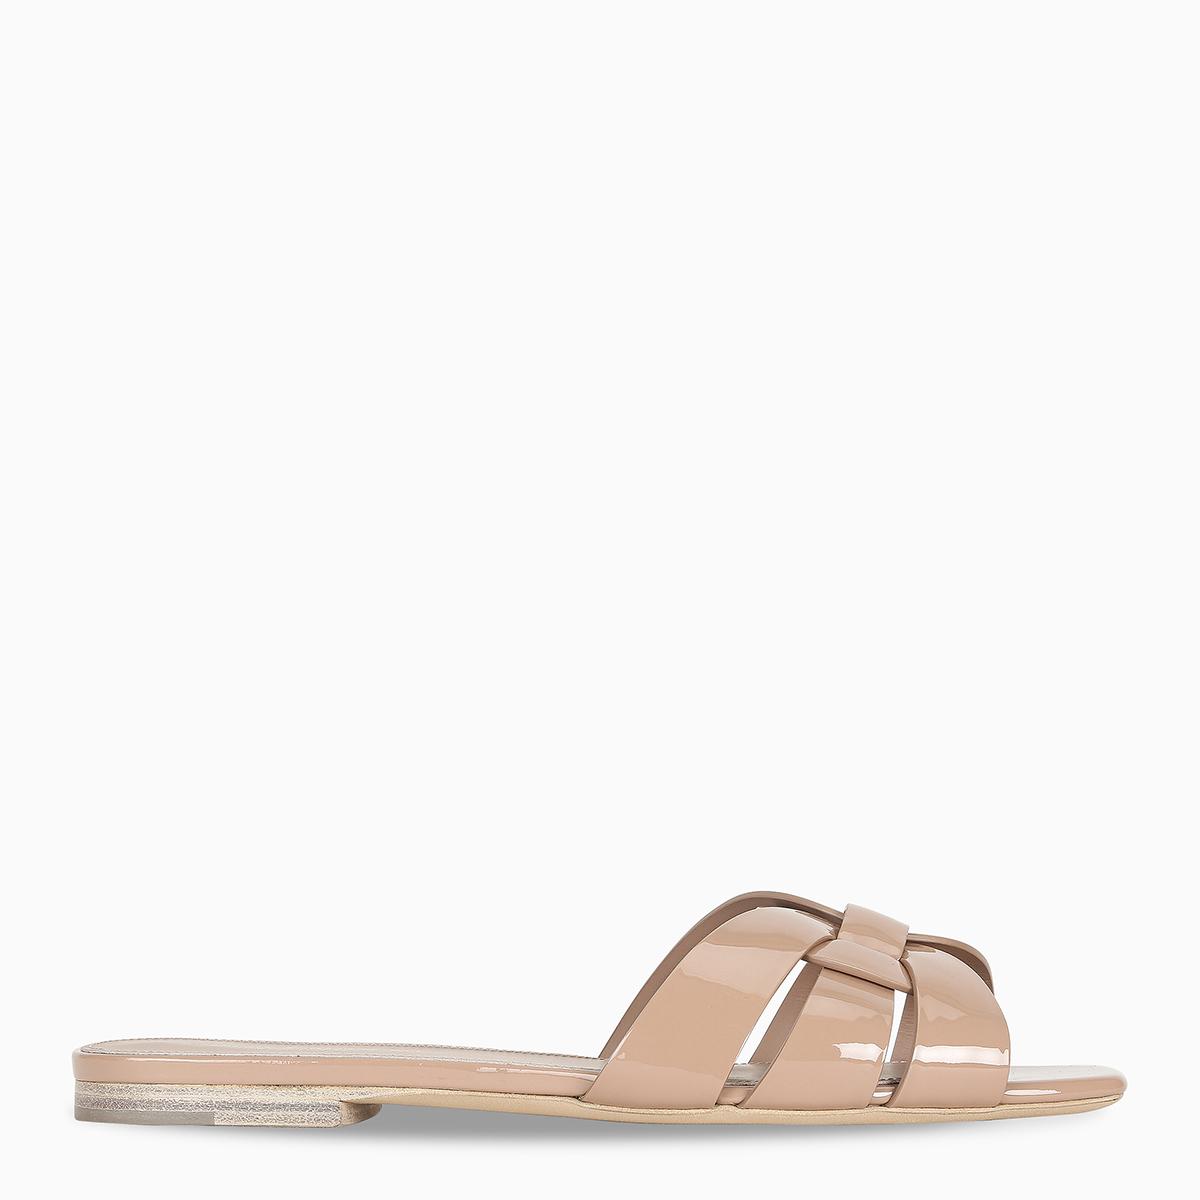 Saint Laurent Leather Nude Patent Tribute Sandals in Beige (Natural) - Lyst